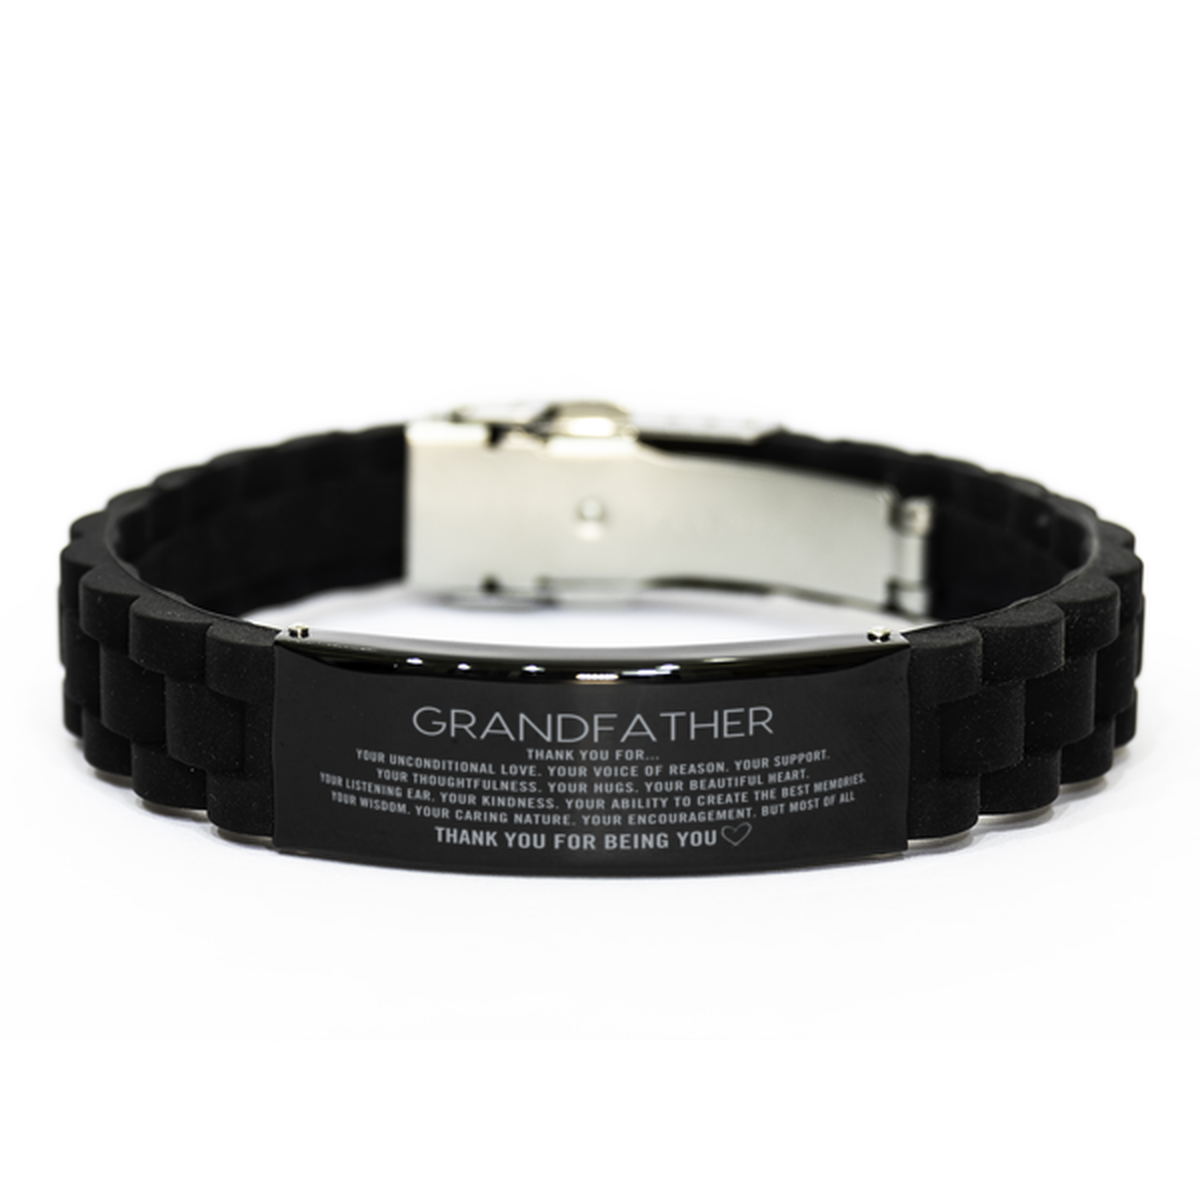 Grandfather Black Glidelock Clasp Bracelet Custom, Engraved Gifts For Grandfather Christmas Graduation Birthday Gifts for Men Women Grandfather Thank you for Your unconditional love